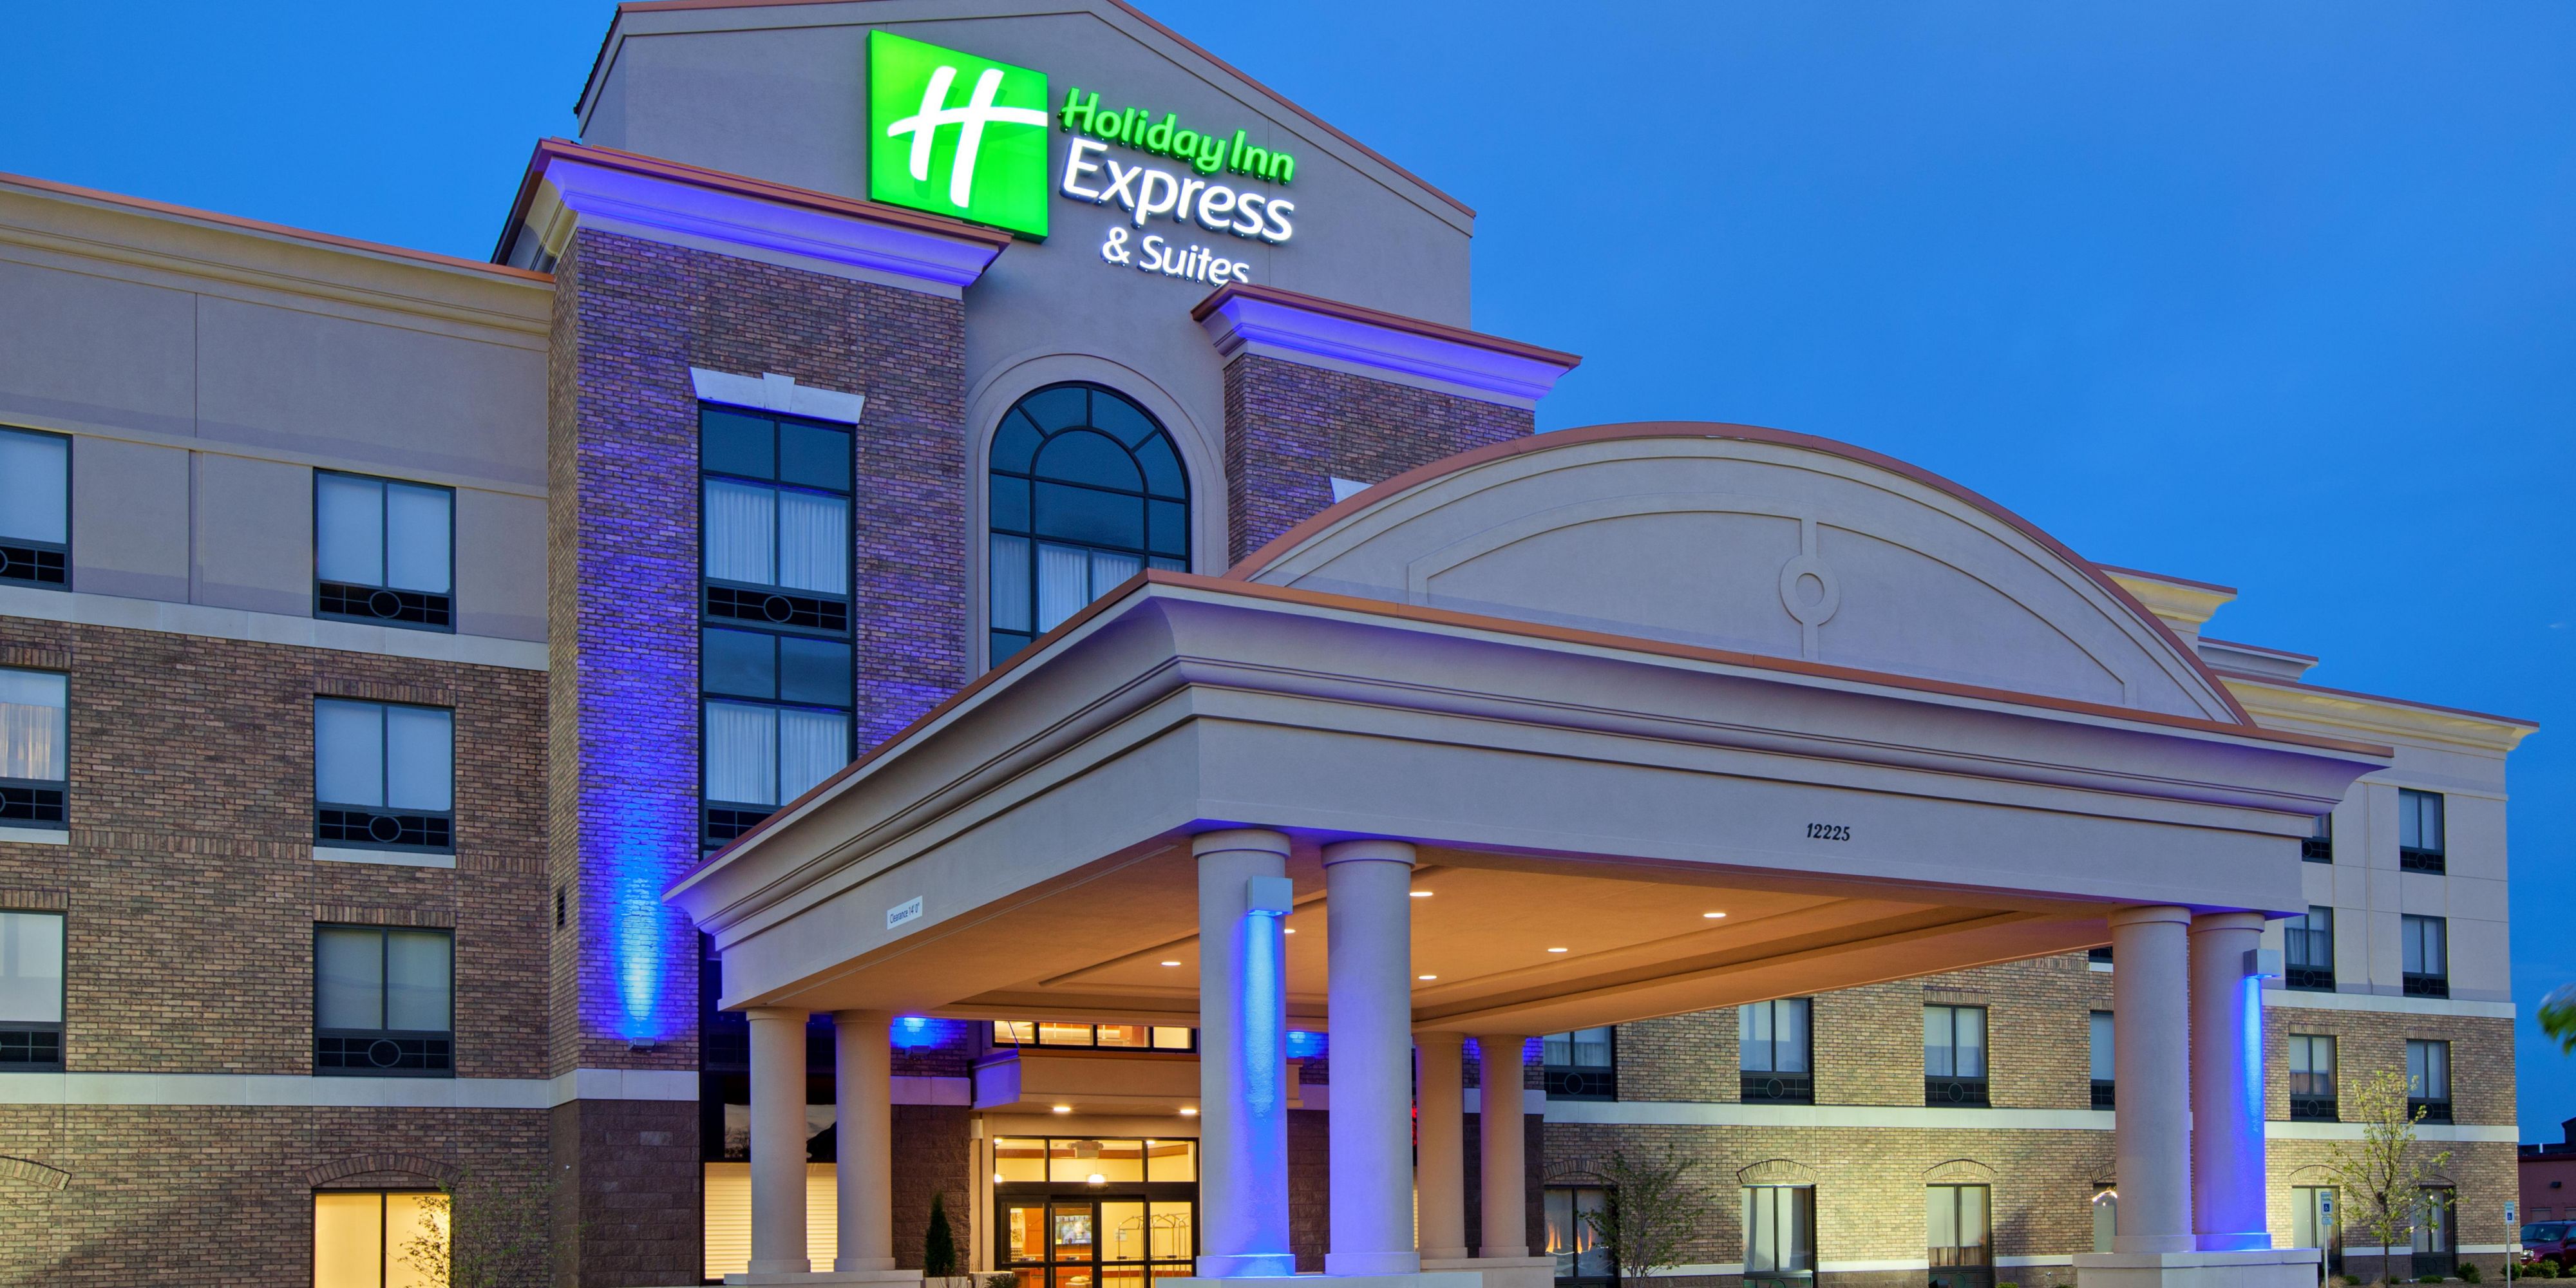 Hotel is located within walking distance to Indiana Premium Outlets.